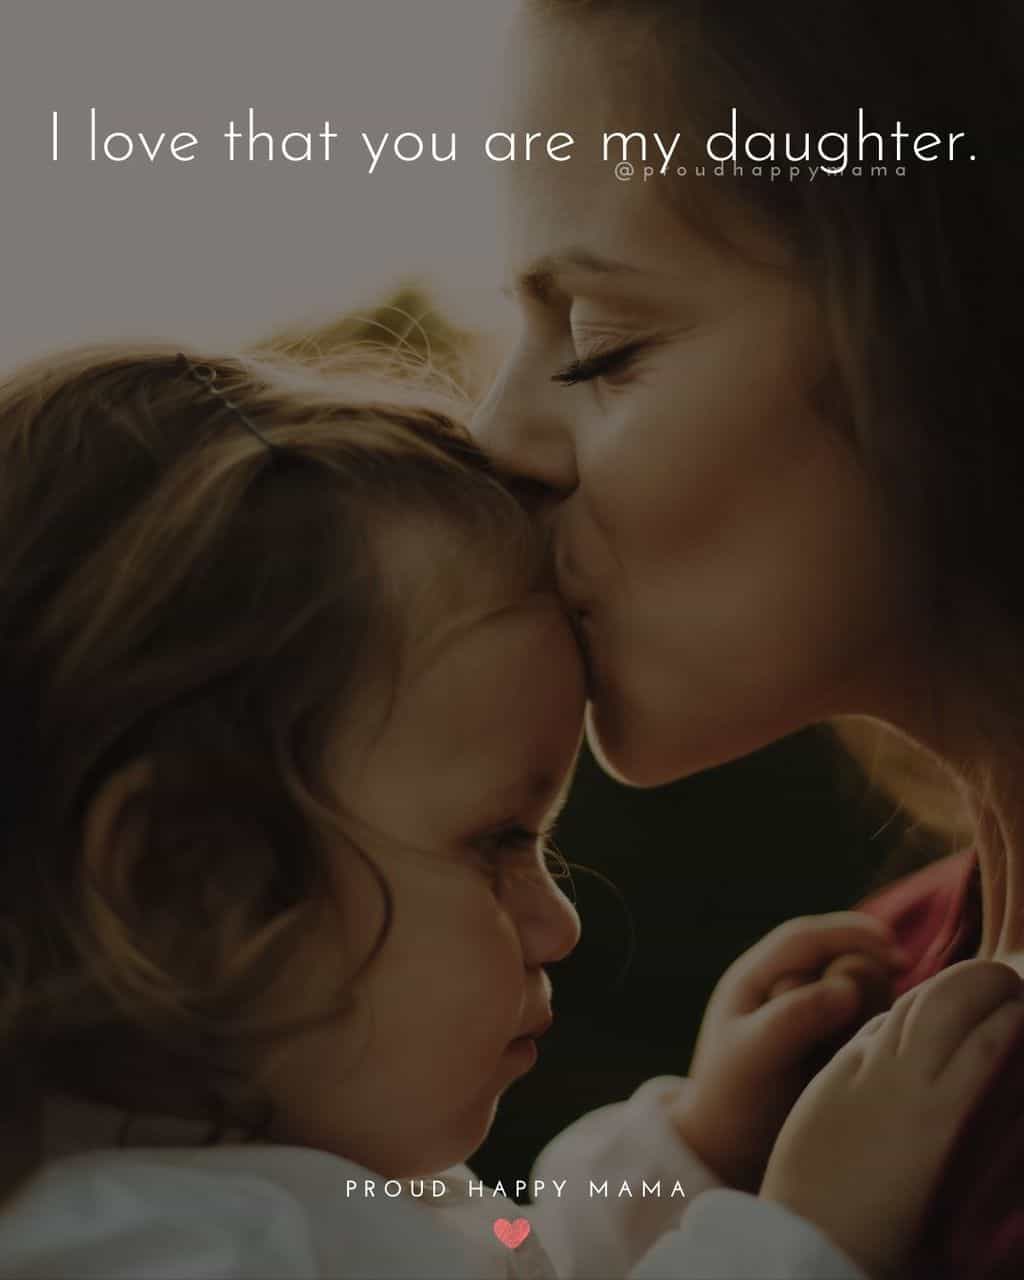 caption for daughter photo - ‘My daughter is so much more than I could ever have imagined. Every day she makes my world better.’ Daughter Quotes - ‘I love that you are my daughter.’